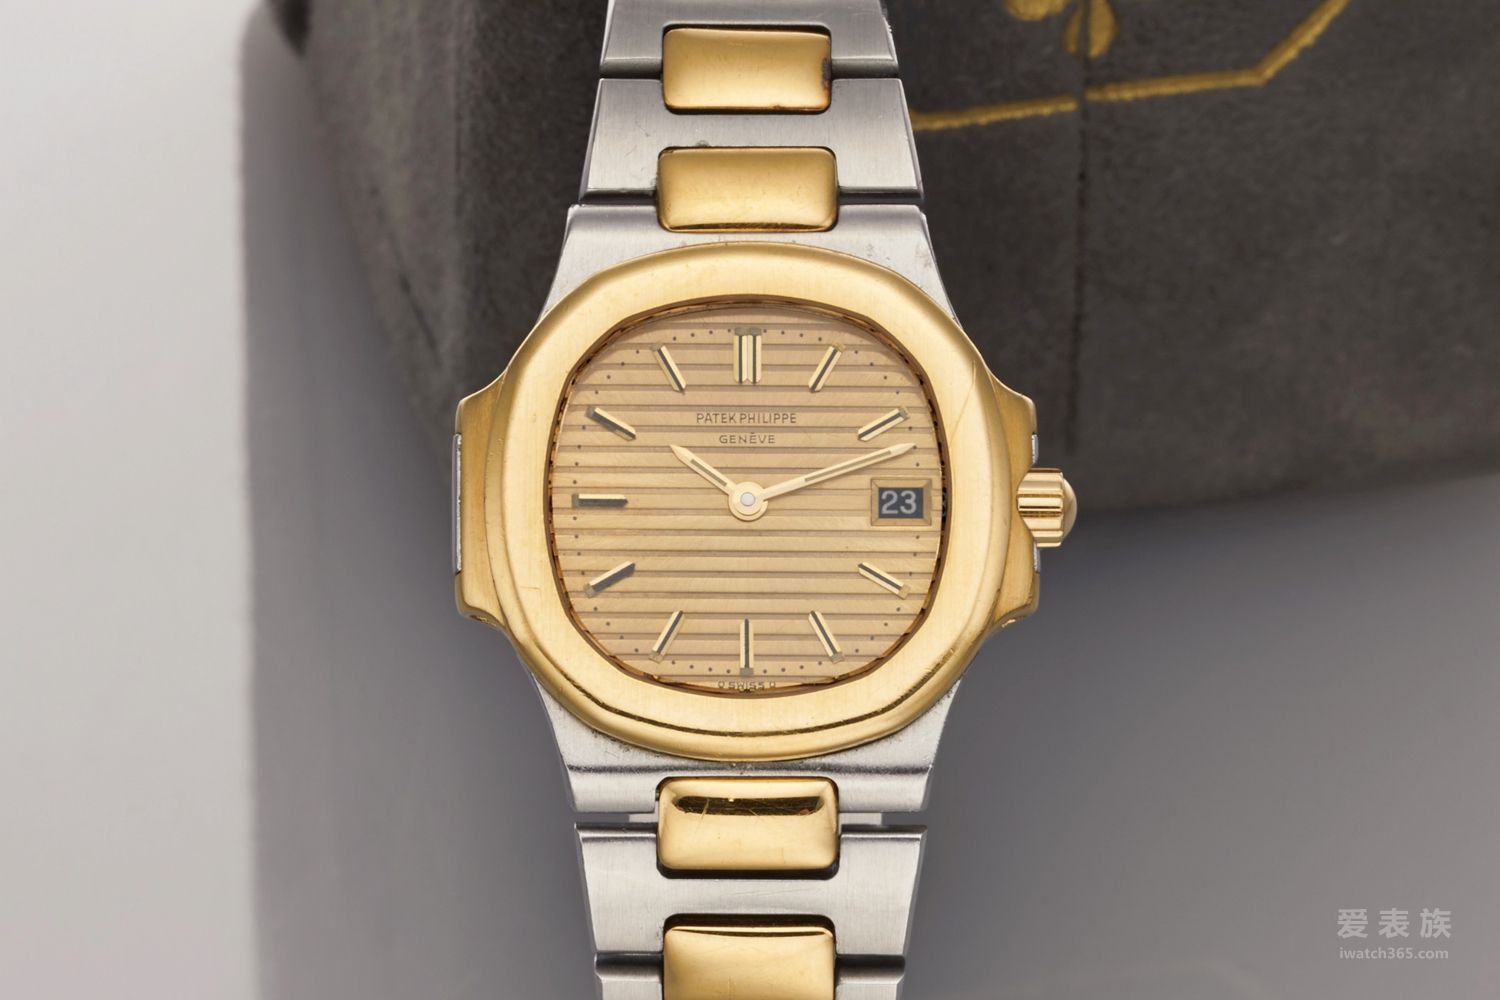 The Patek Philippe Nautilus with smaller size are designed for women or men who have thinner wrists.